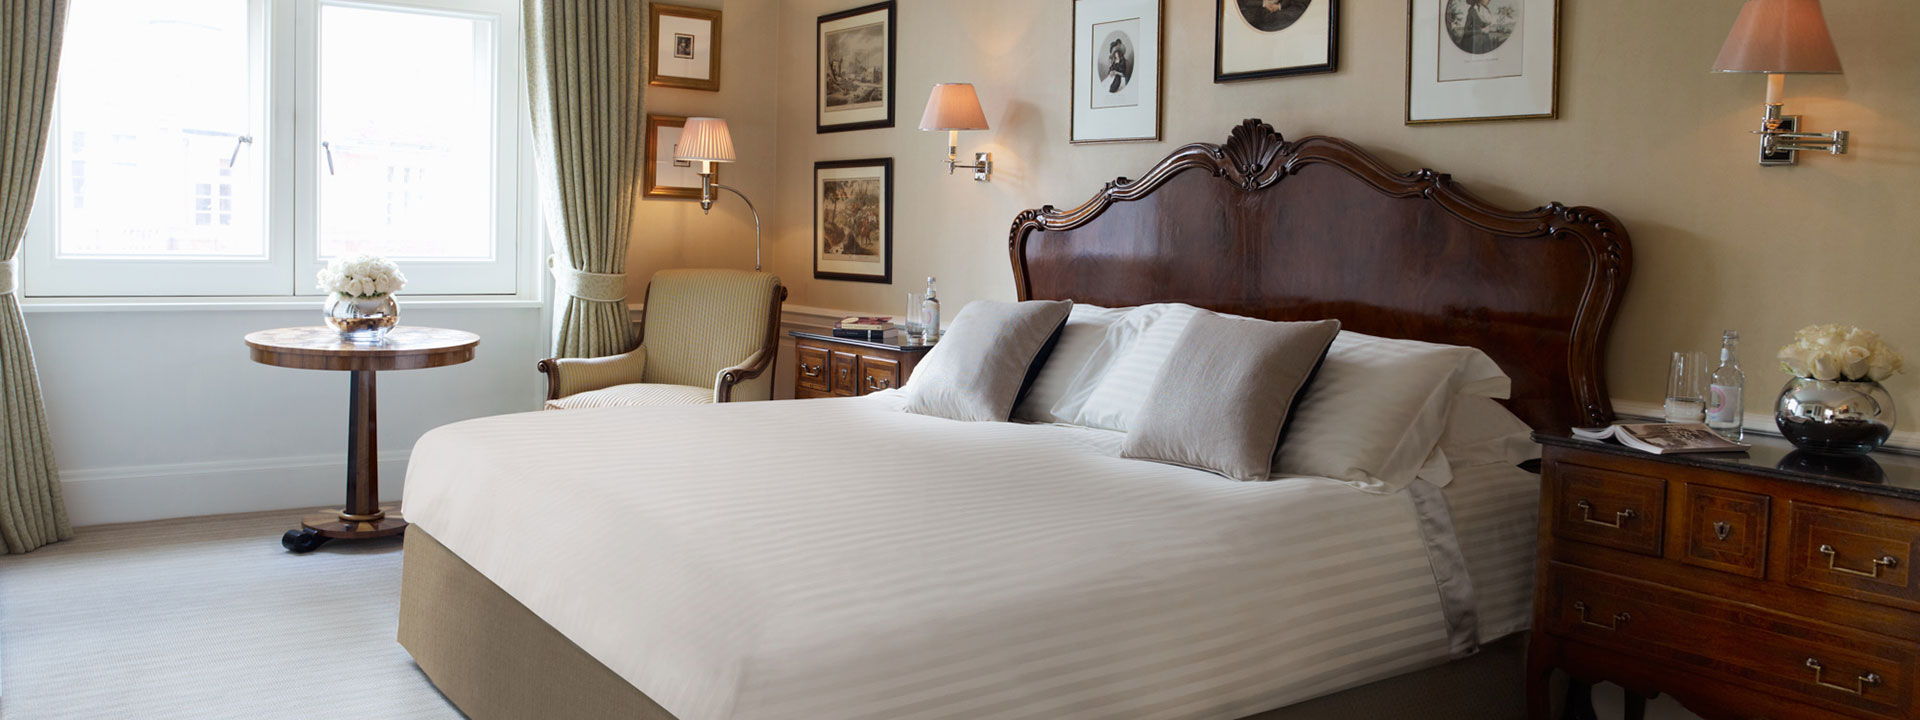 Comfortable and spacious queen bed with an little wood table by a bright window at The Connaught suite.